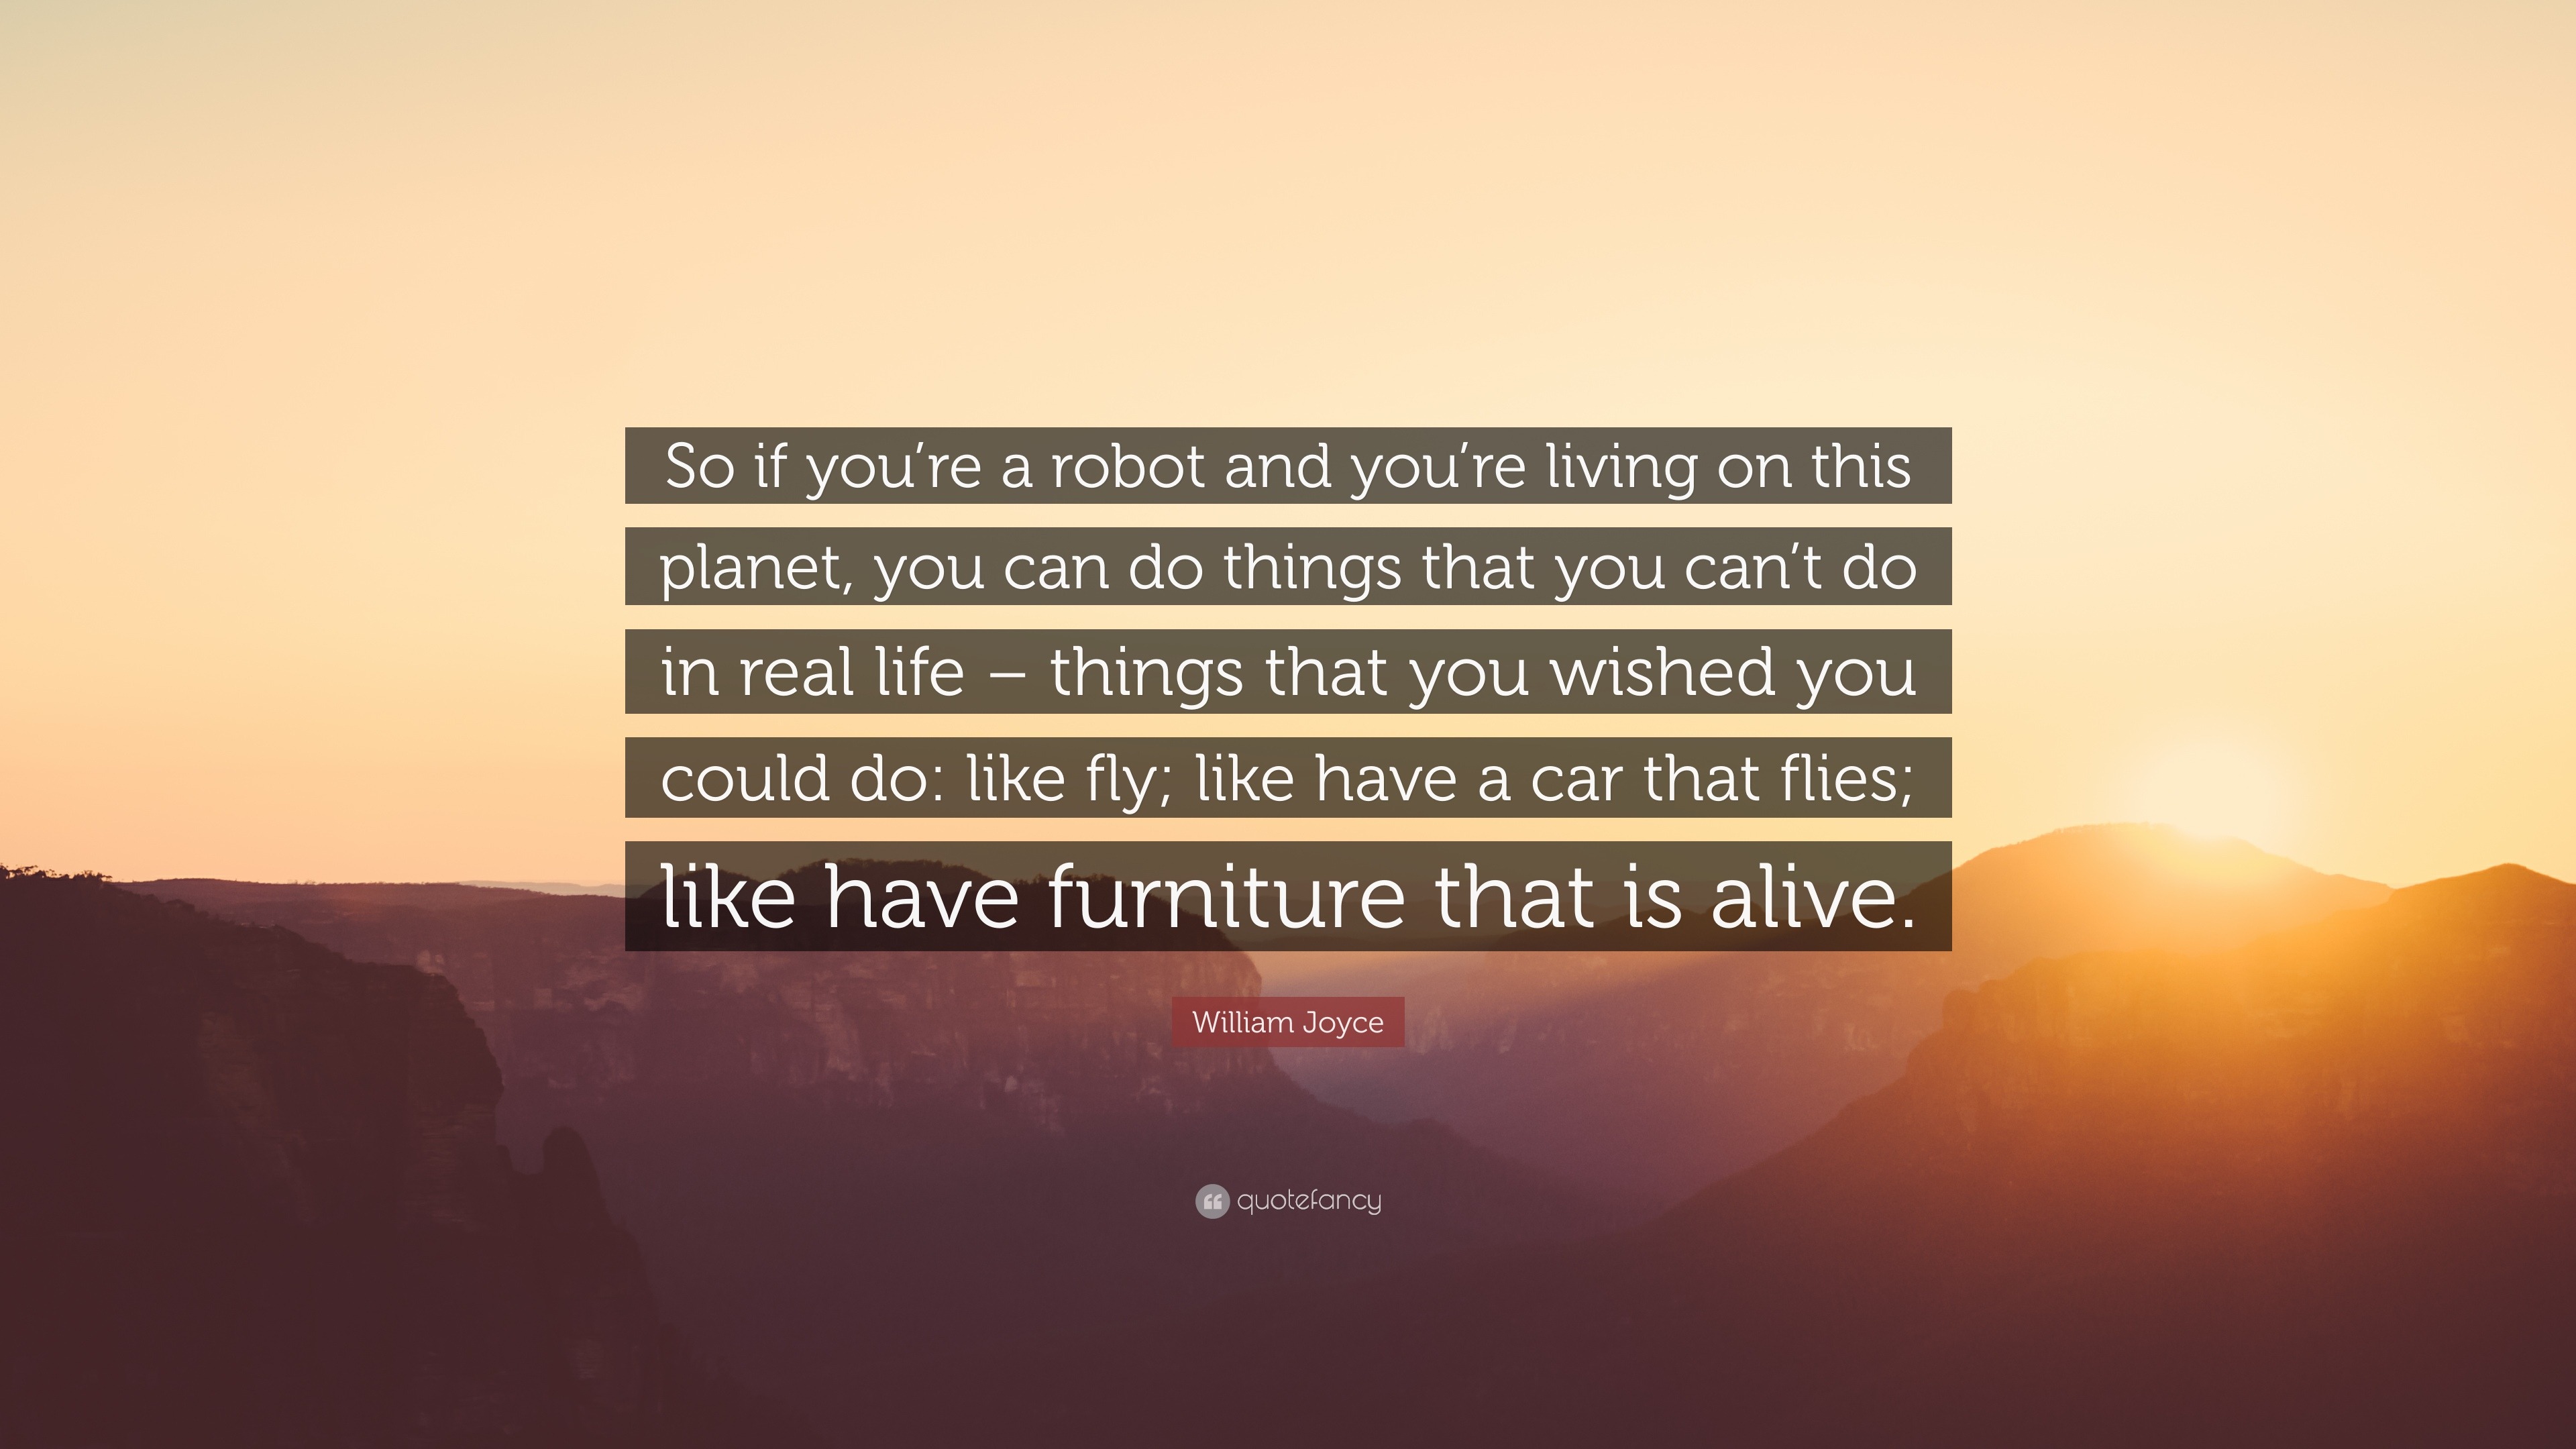 William Joyce Quote “So if you re a robot and you re